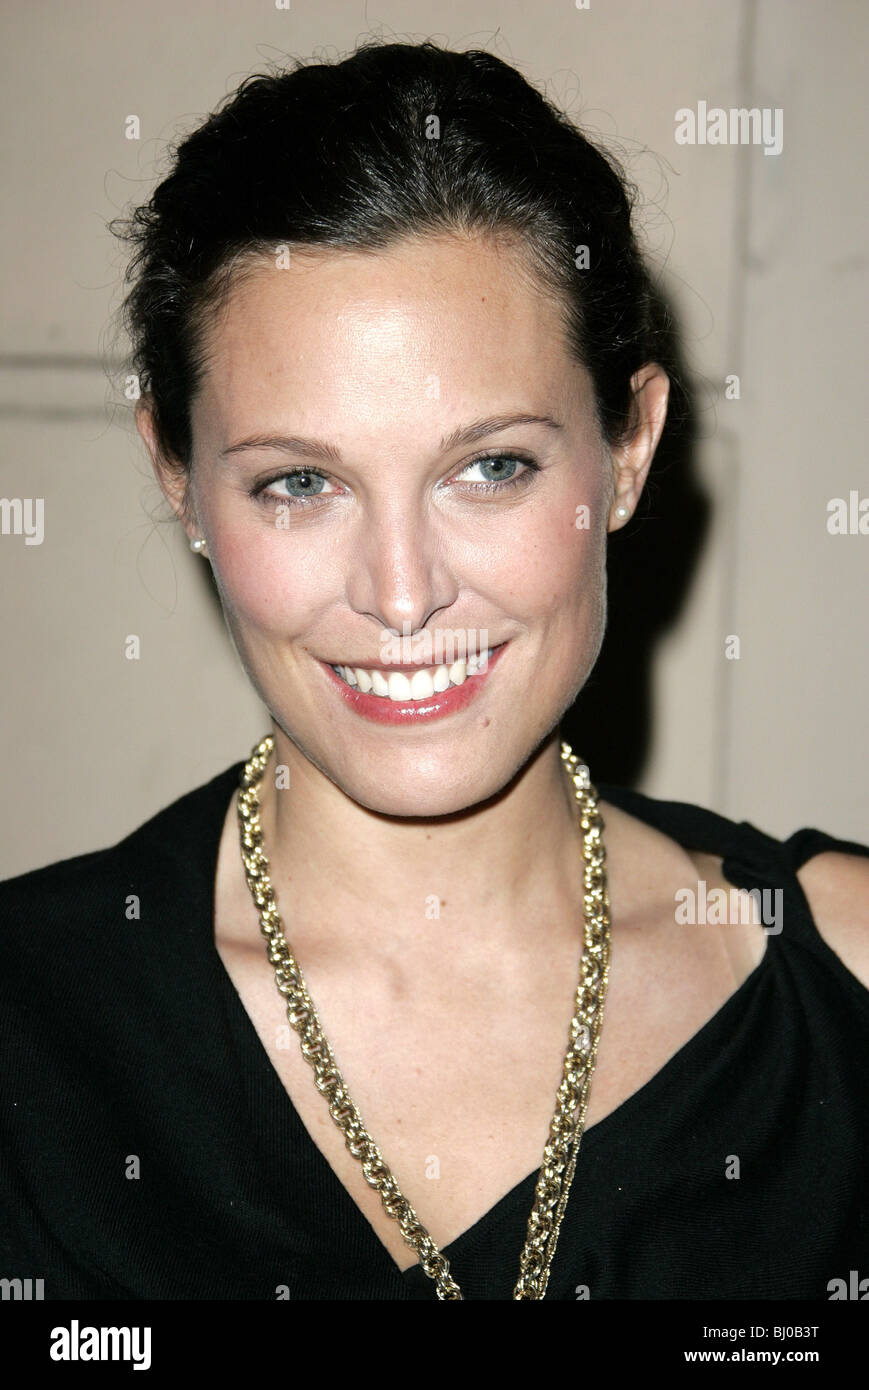 ERIN DANIELS THE L WORD 3RD SEASON PREMIERE HOLLYWOOD LOS ANGELES USA 08 January 2006 Stock Photo